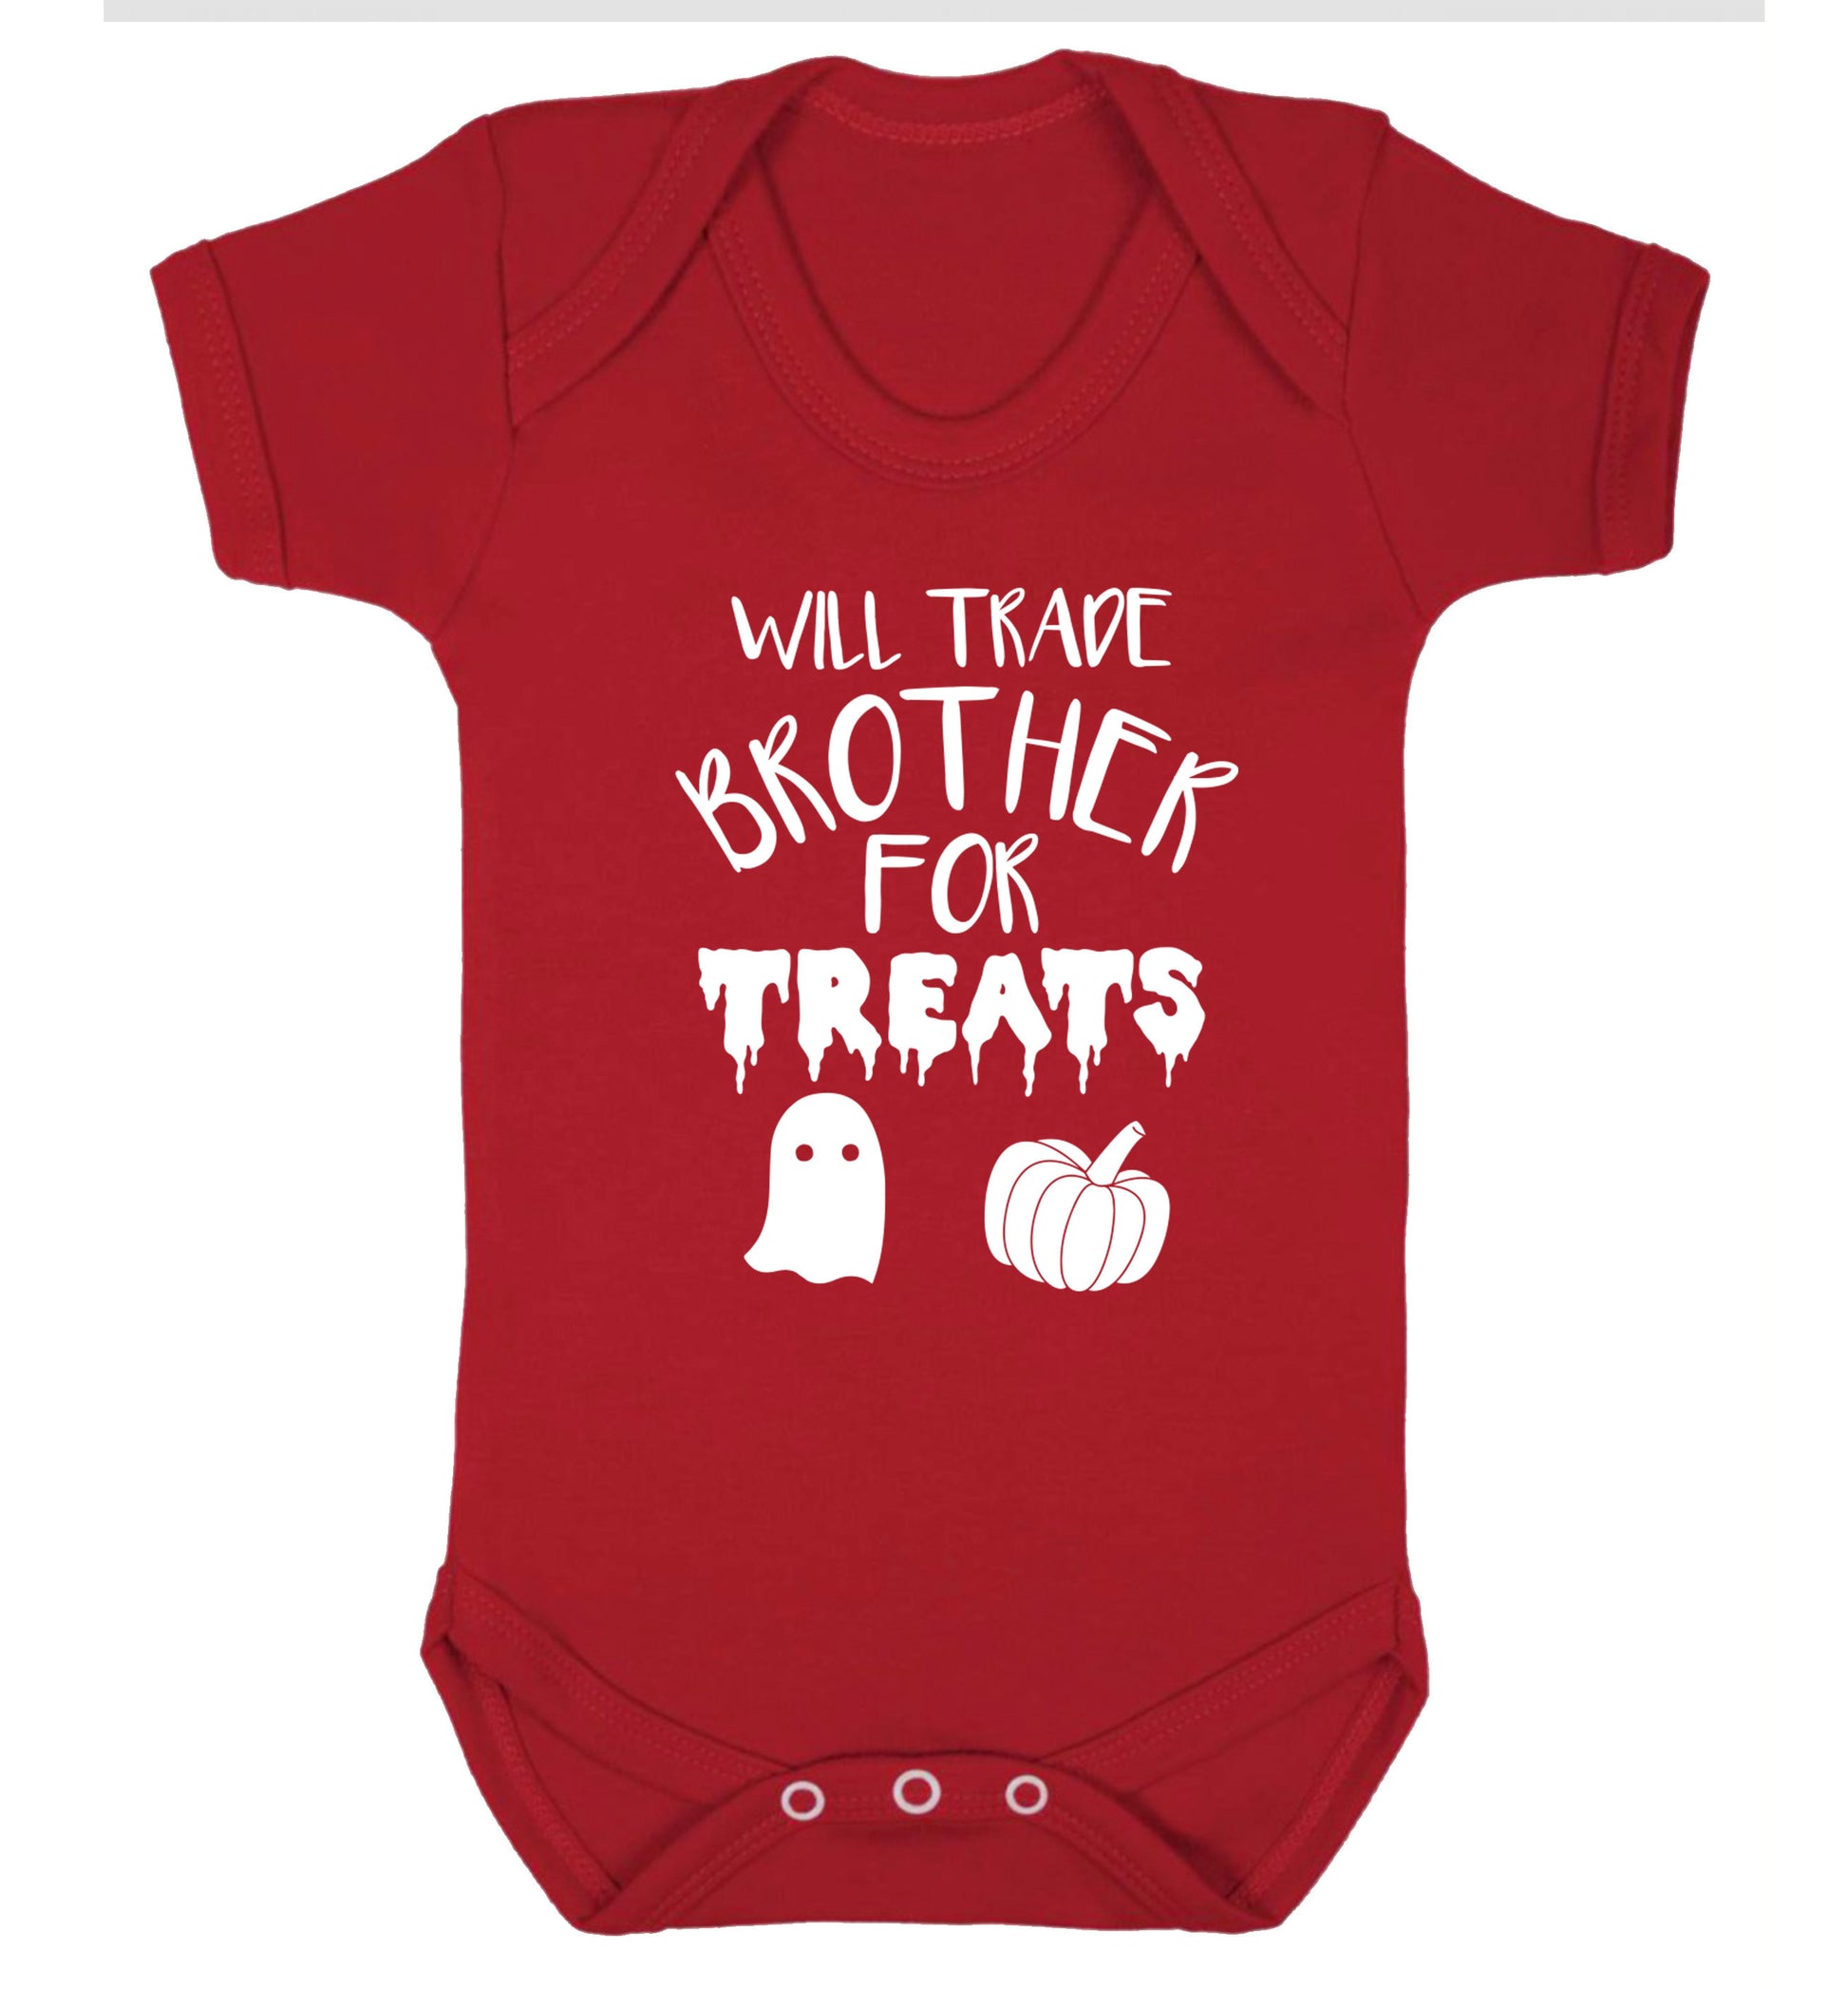 Will trade brother for treats Baby Vest red 18-24 months